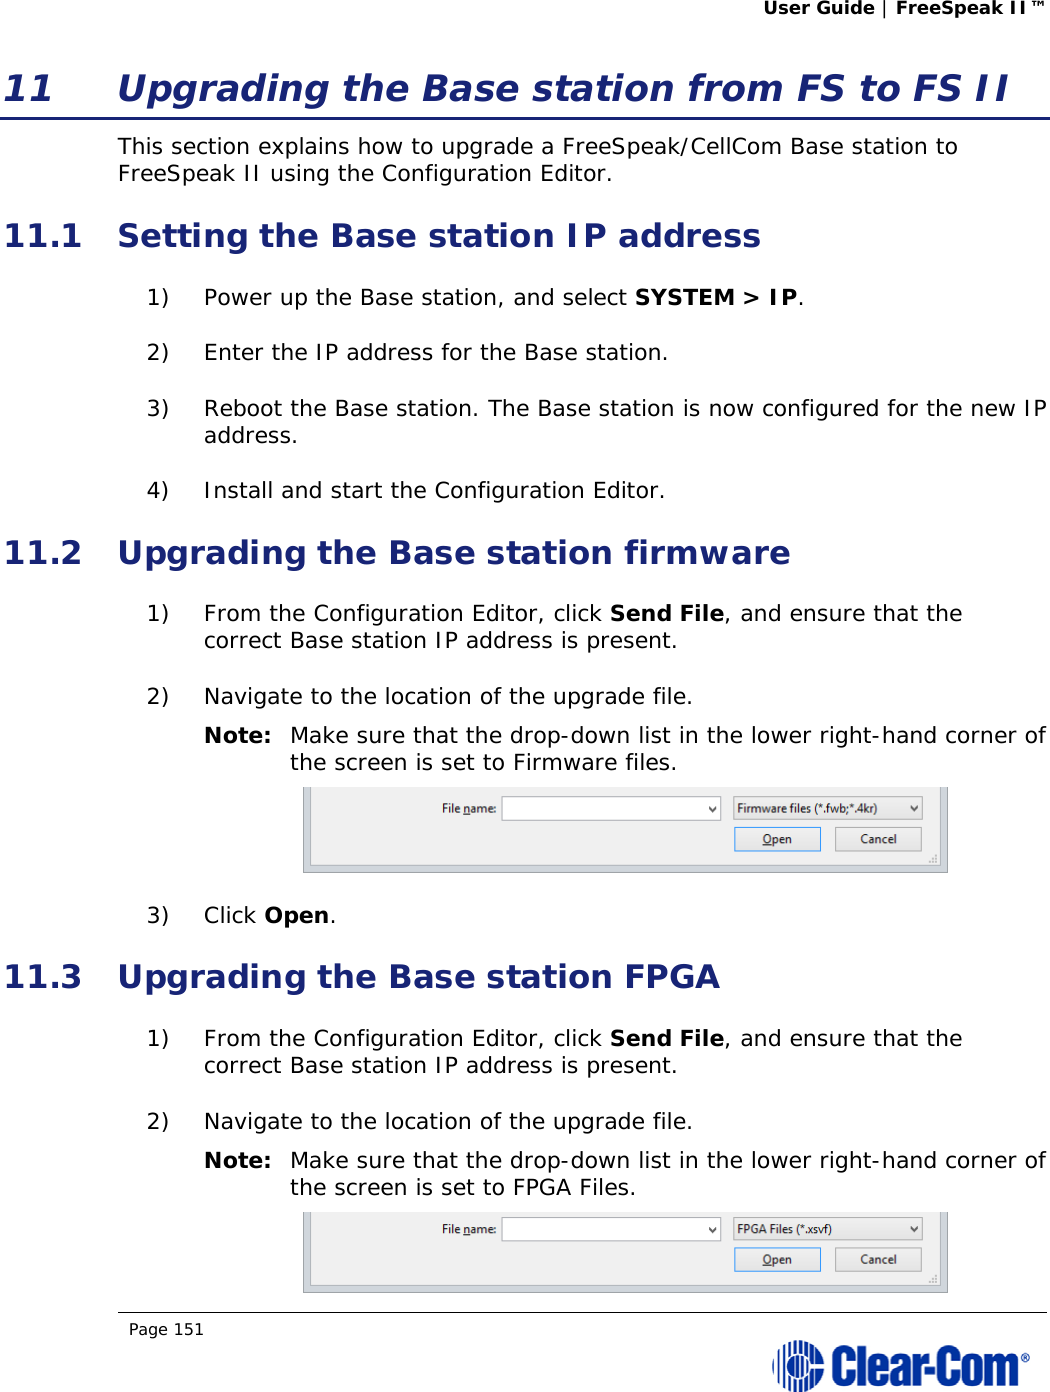 User Guide | FreeSpeak II™  Page 151  11 Upgrading the Base station from FS to FS II This section explains how to upgrade a FreeSpeak/CellCom Base station to FreeSpeak II using the Configuration Editor. 11.1 Setting the Base station IP address 1) Power up the Base station, and select SYSTEM &gt; IP. 2) Enter the IP address for the Base station. 3) Reboot the Base station. The Base station is now configured for the new IP address. 4) Install and start the Configuration Editor. 11.2 Upgrading the Base station firmware 1) From the Configuration Editor, click Send File, and ensure that the correct Base station IP address is present. 2) Navigate to the location of the upgrade file. Note: Make sure that the drop-down list in the lower right-hand corner of the screen is set to Firmware files.  3) Click Open. 11.3 Upgrading the Base station FPGA 1) From the Configuration Editor, click Send File, and ensure that the correct Base station IP address is present. 2) Navigate to the location of the upgrade file. Note: Make sure that the drop-down list in the lower right-hand corner of the screen is set to FPGA Files.  